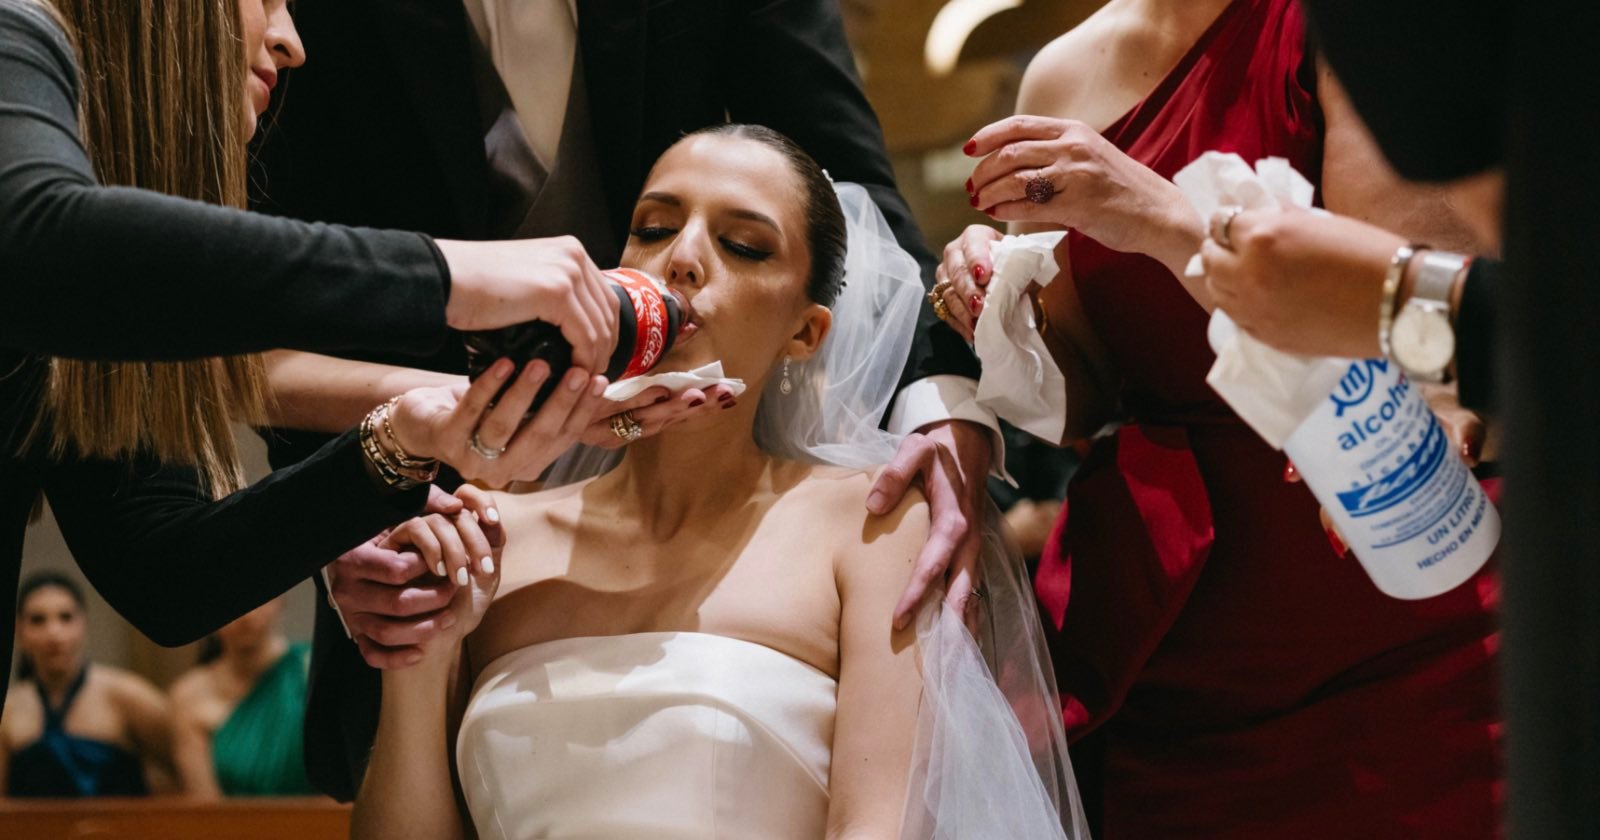  wedding photographer goes viral bride almost passing 